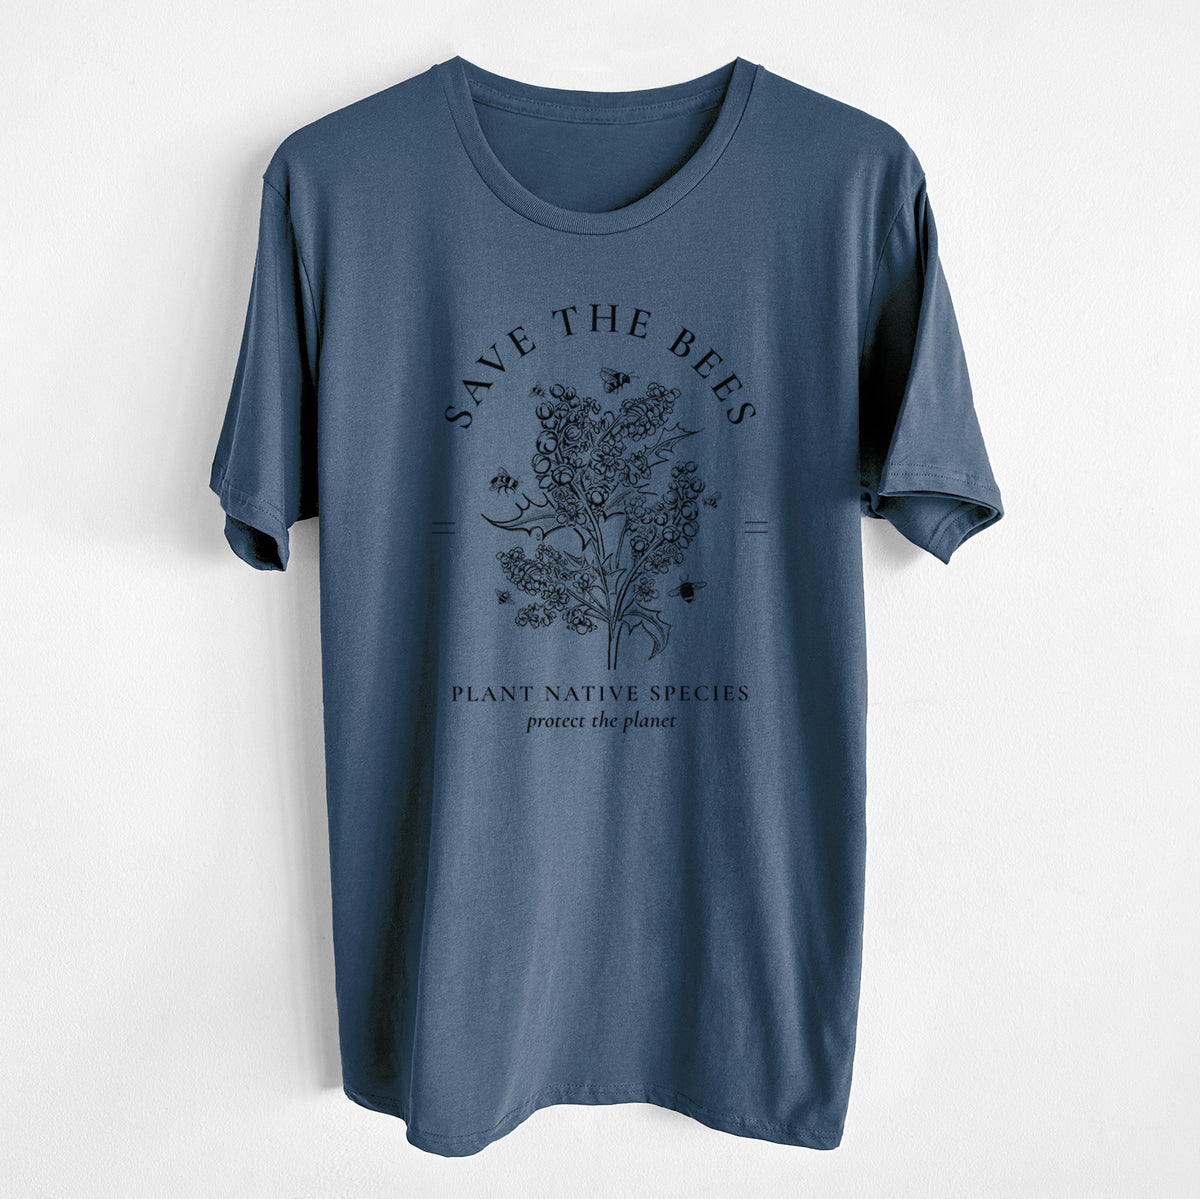 Save the Bees - Plant Native Species - Unisex Crewneck - Made in USA - 100% Organic Cotton